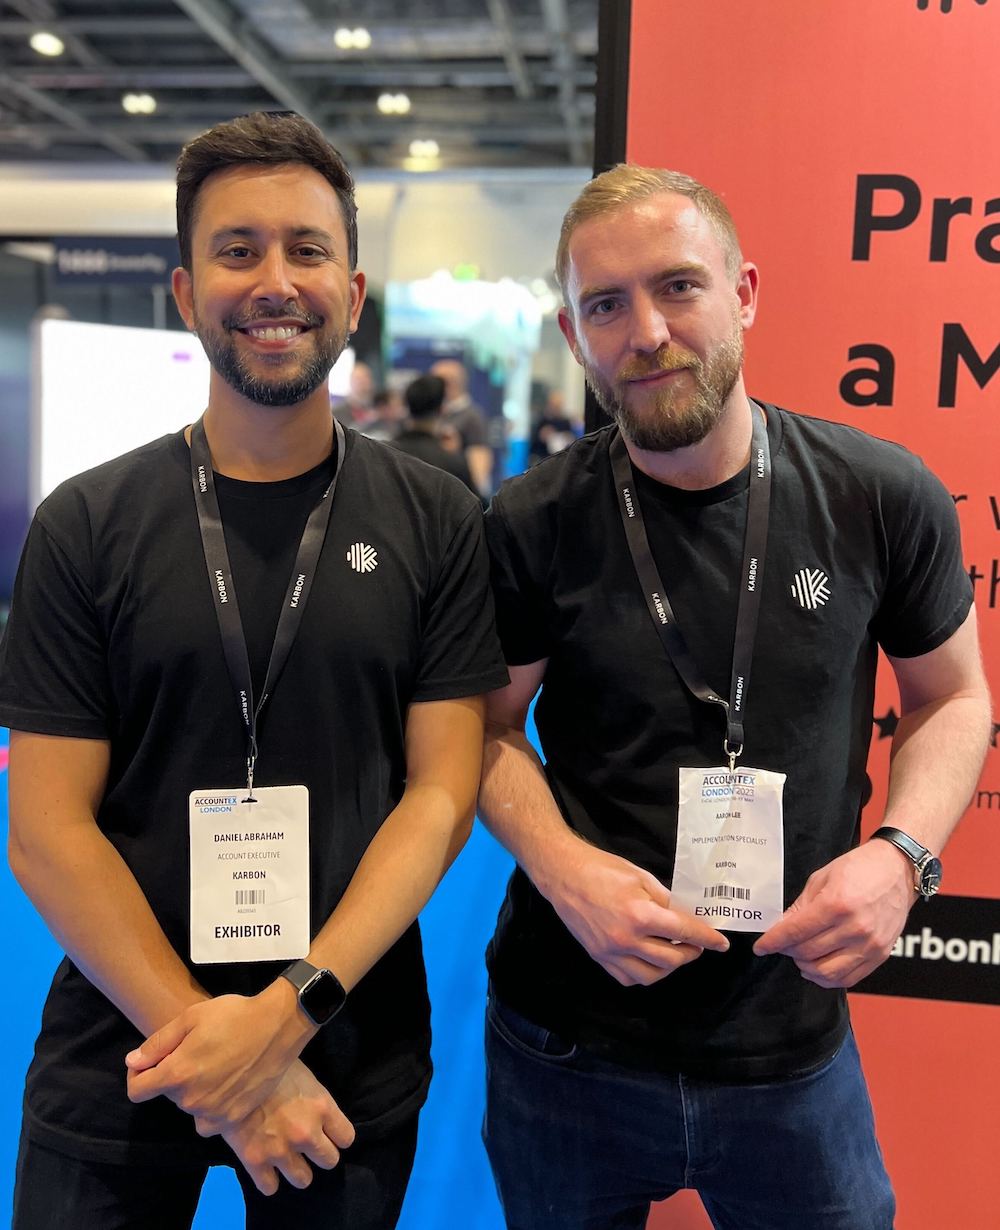 Dan Abraham and Aaron Lee standing next to each other at Accountex London 2023. They're both wearing black Karbon tshirts and the Karbon exhibition stand is in the background.